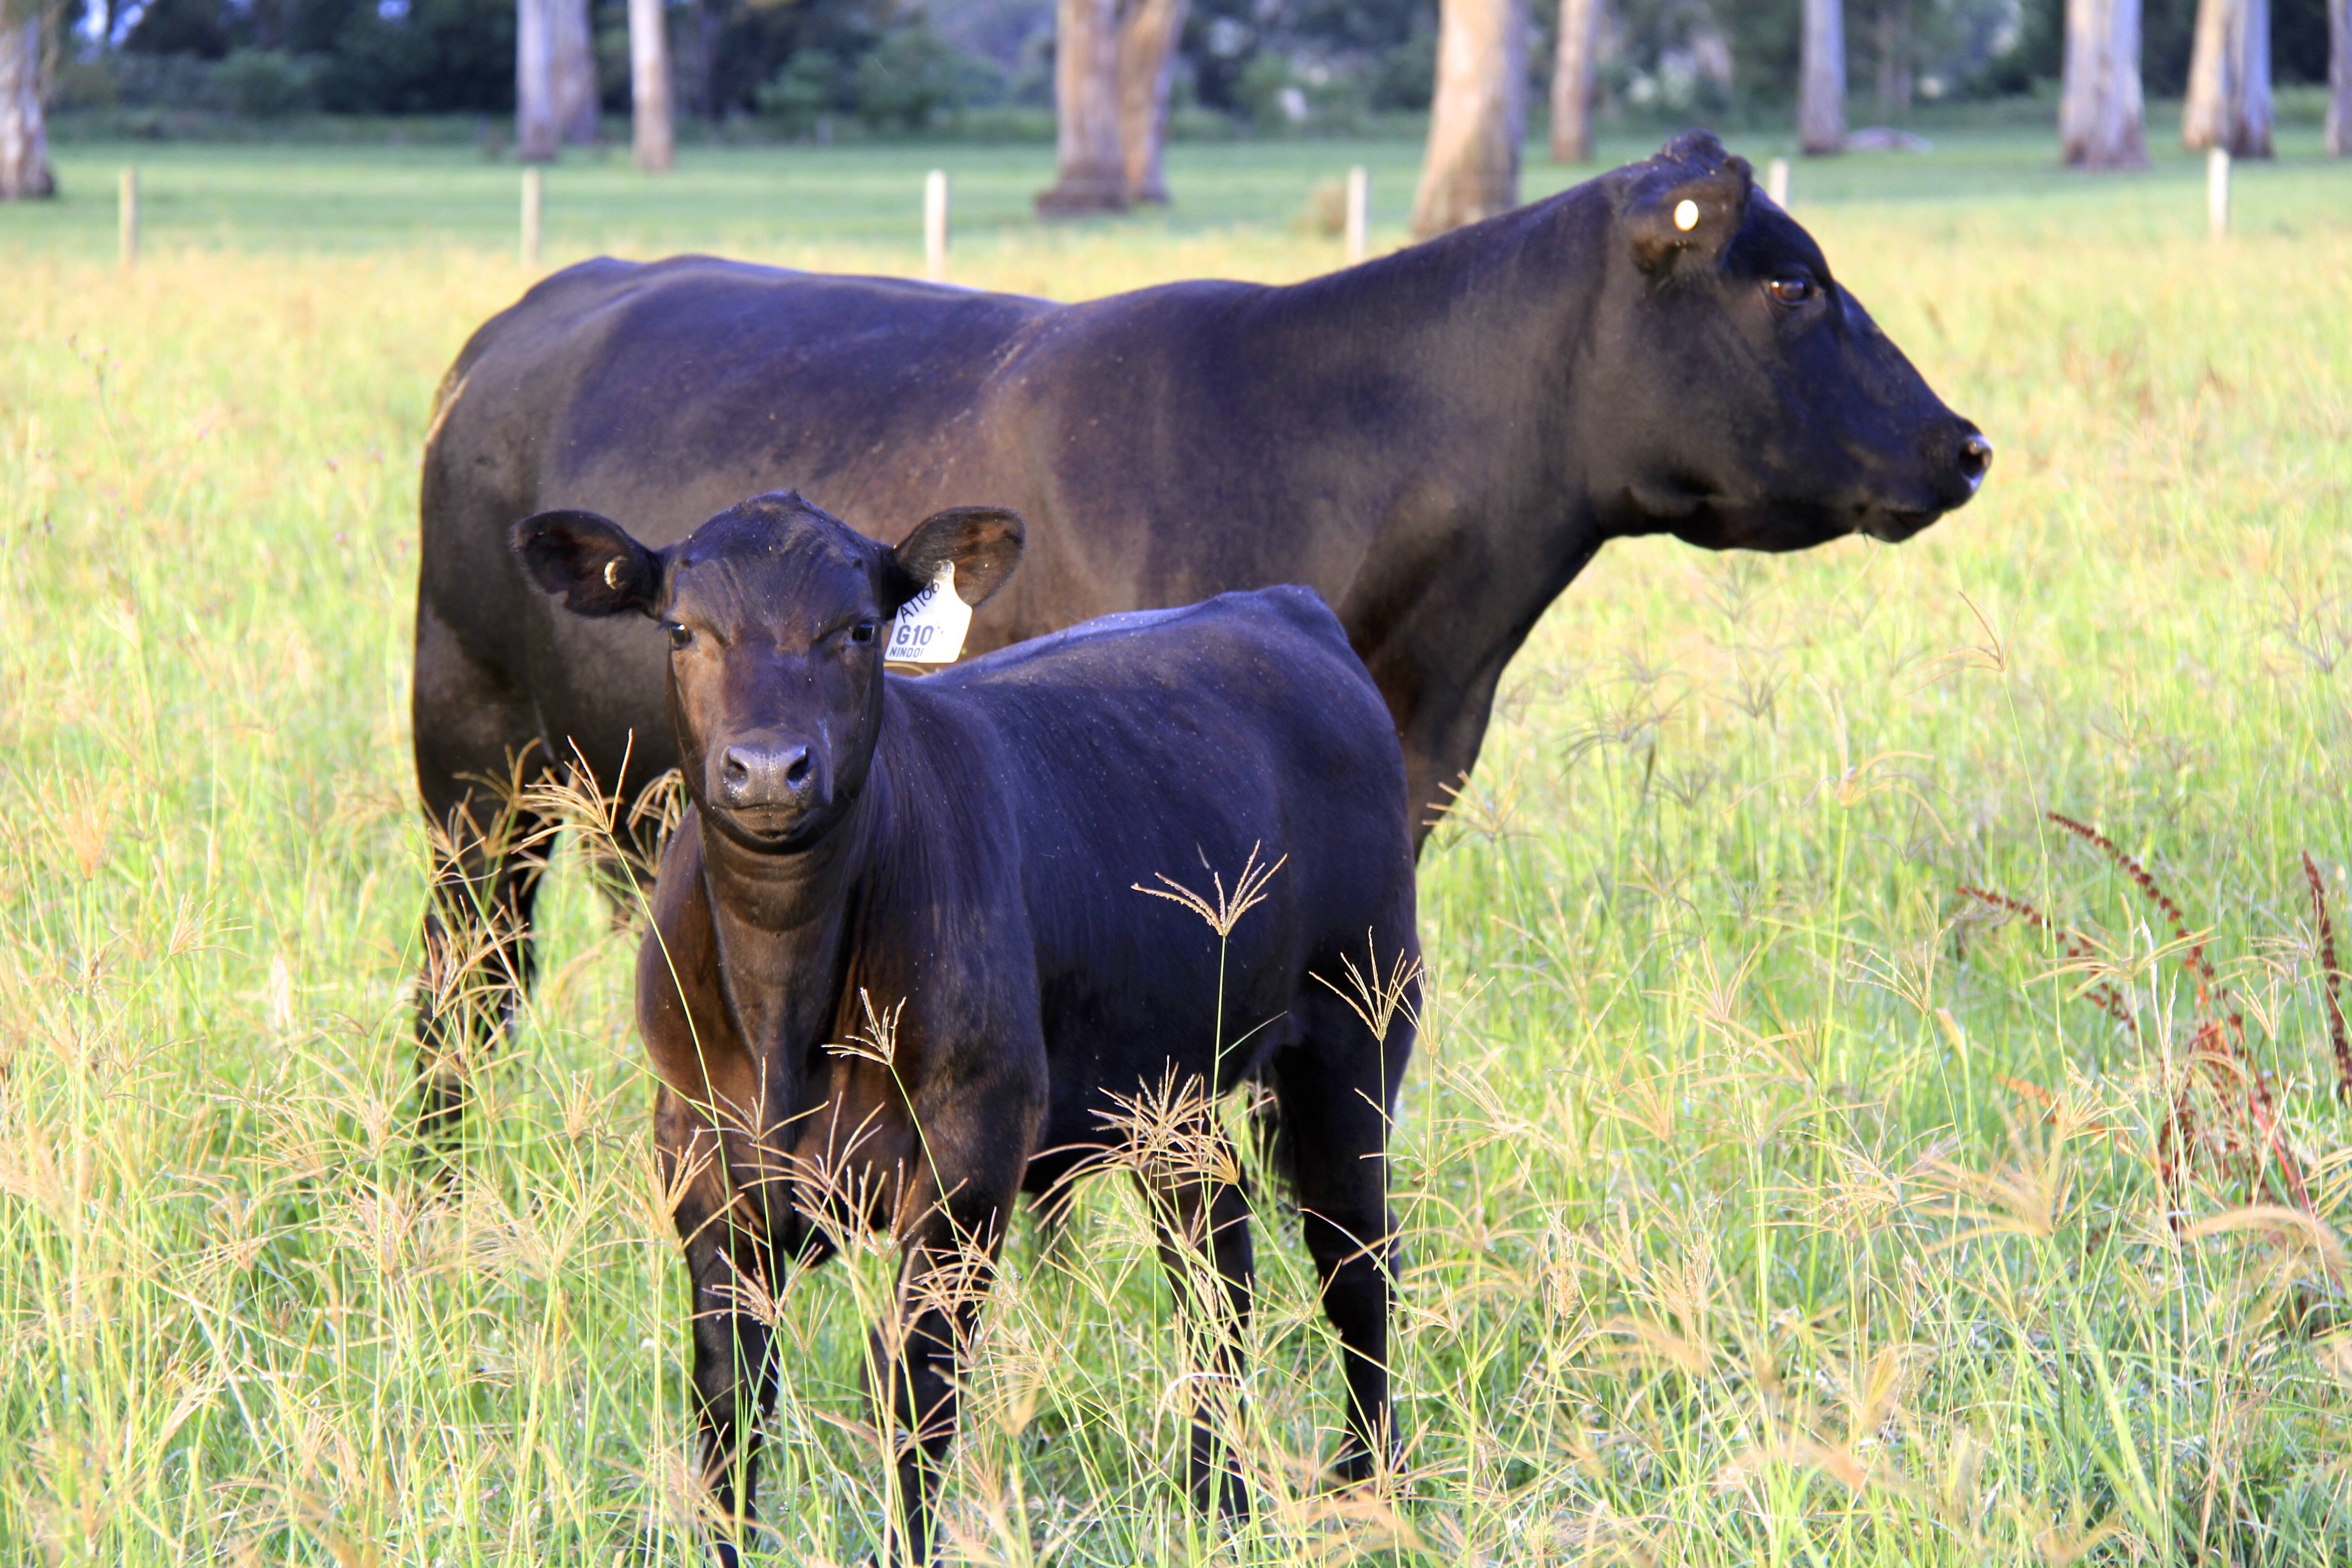 A Guide to Udder and Teat Scoring Beef Cows